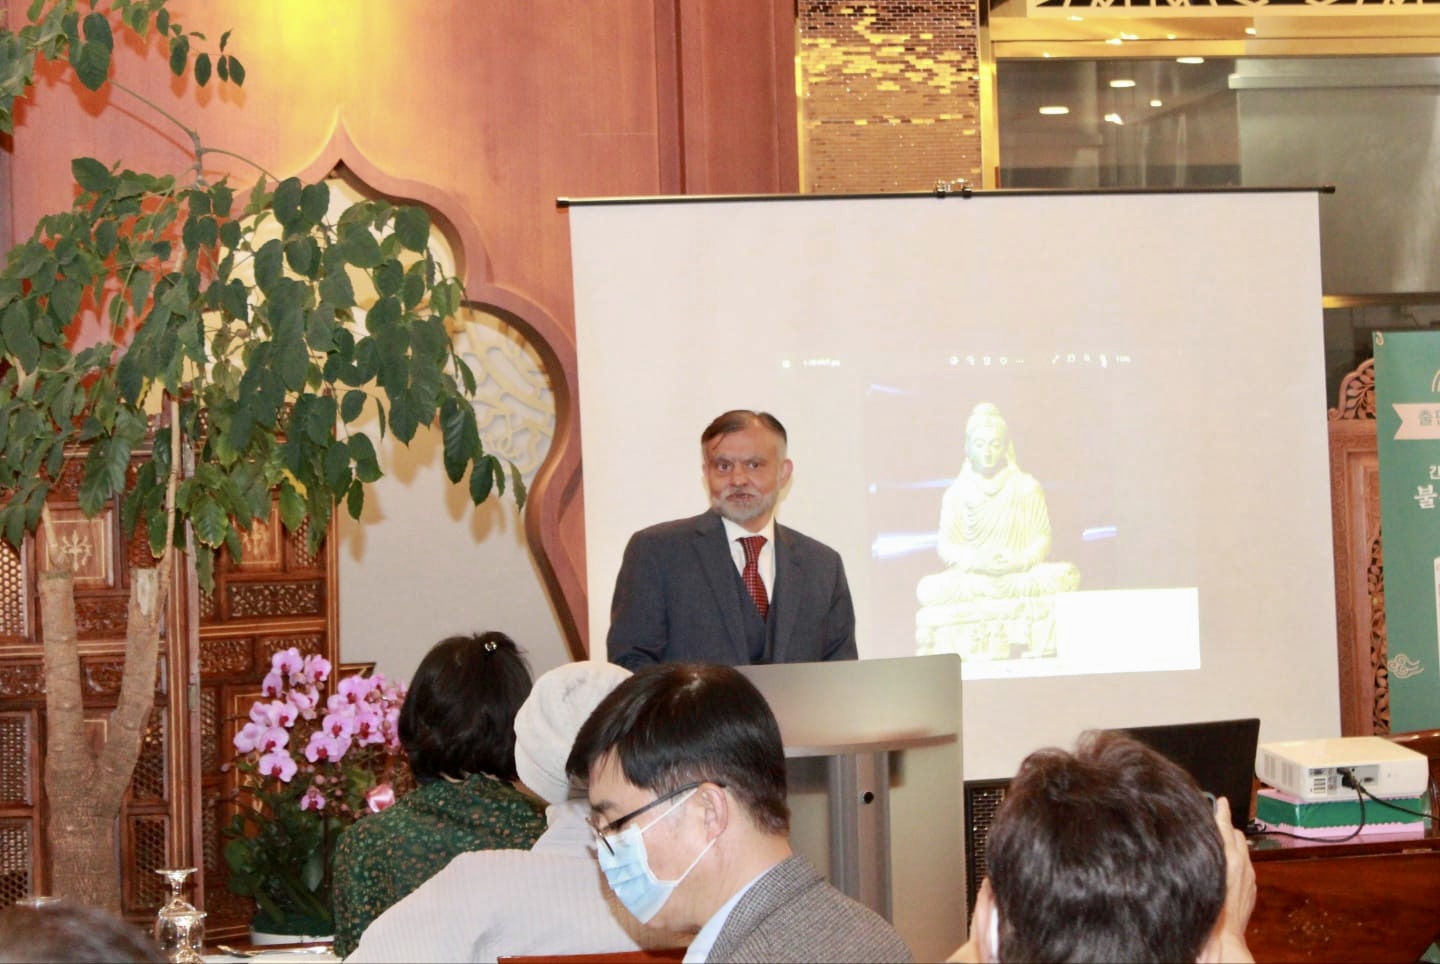 Gandhara art & culture association secretary general Dr Esther Park, held a seminar on the introduction of Mahayana Buddhism from Gandhara Pakistan to Korea at Saffron halal restaurant in Seoul.